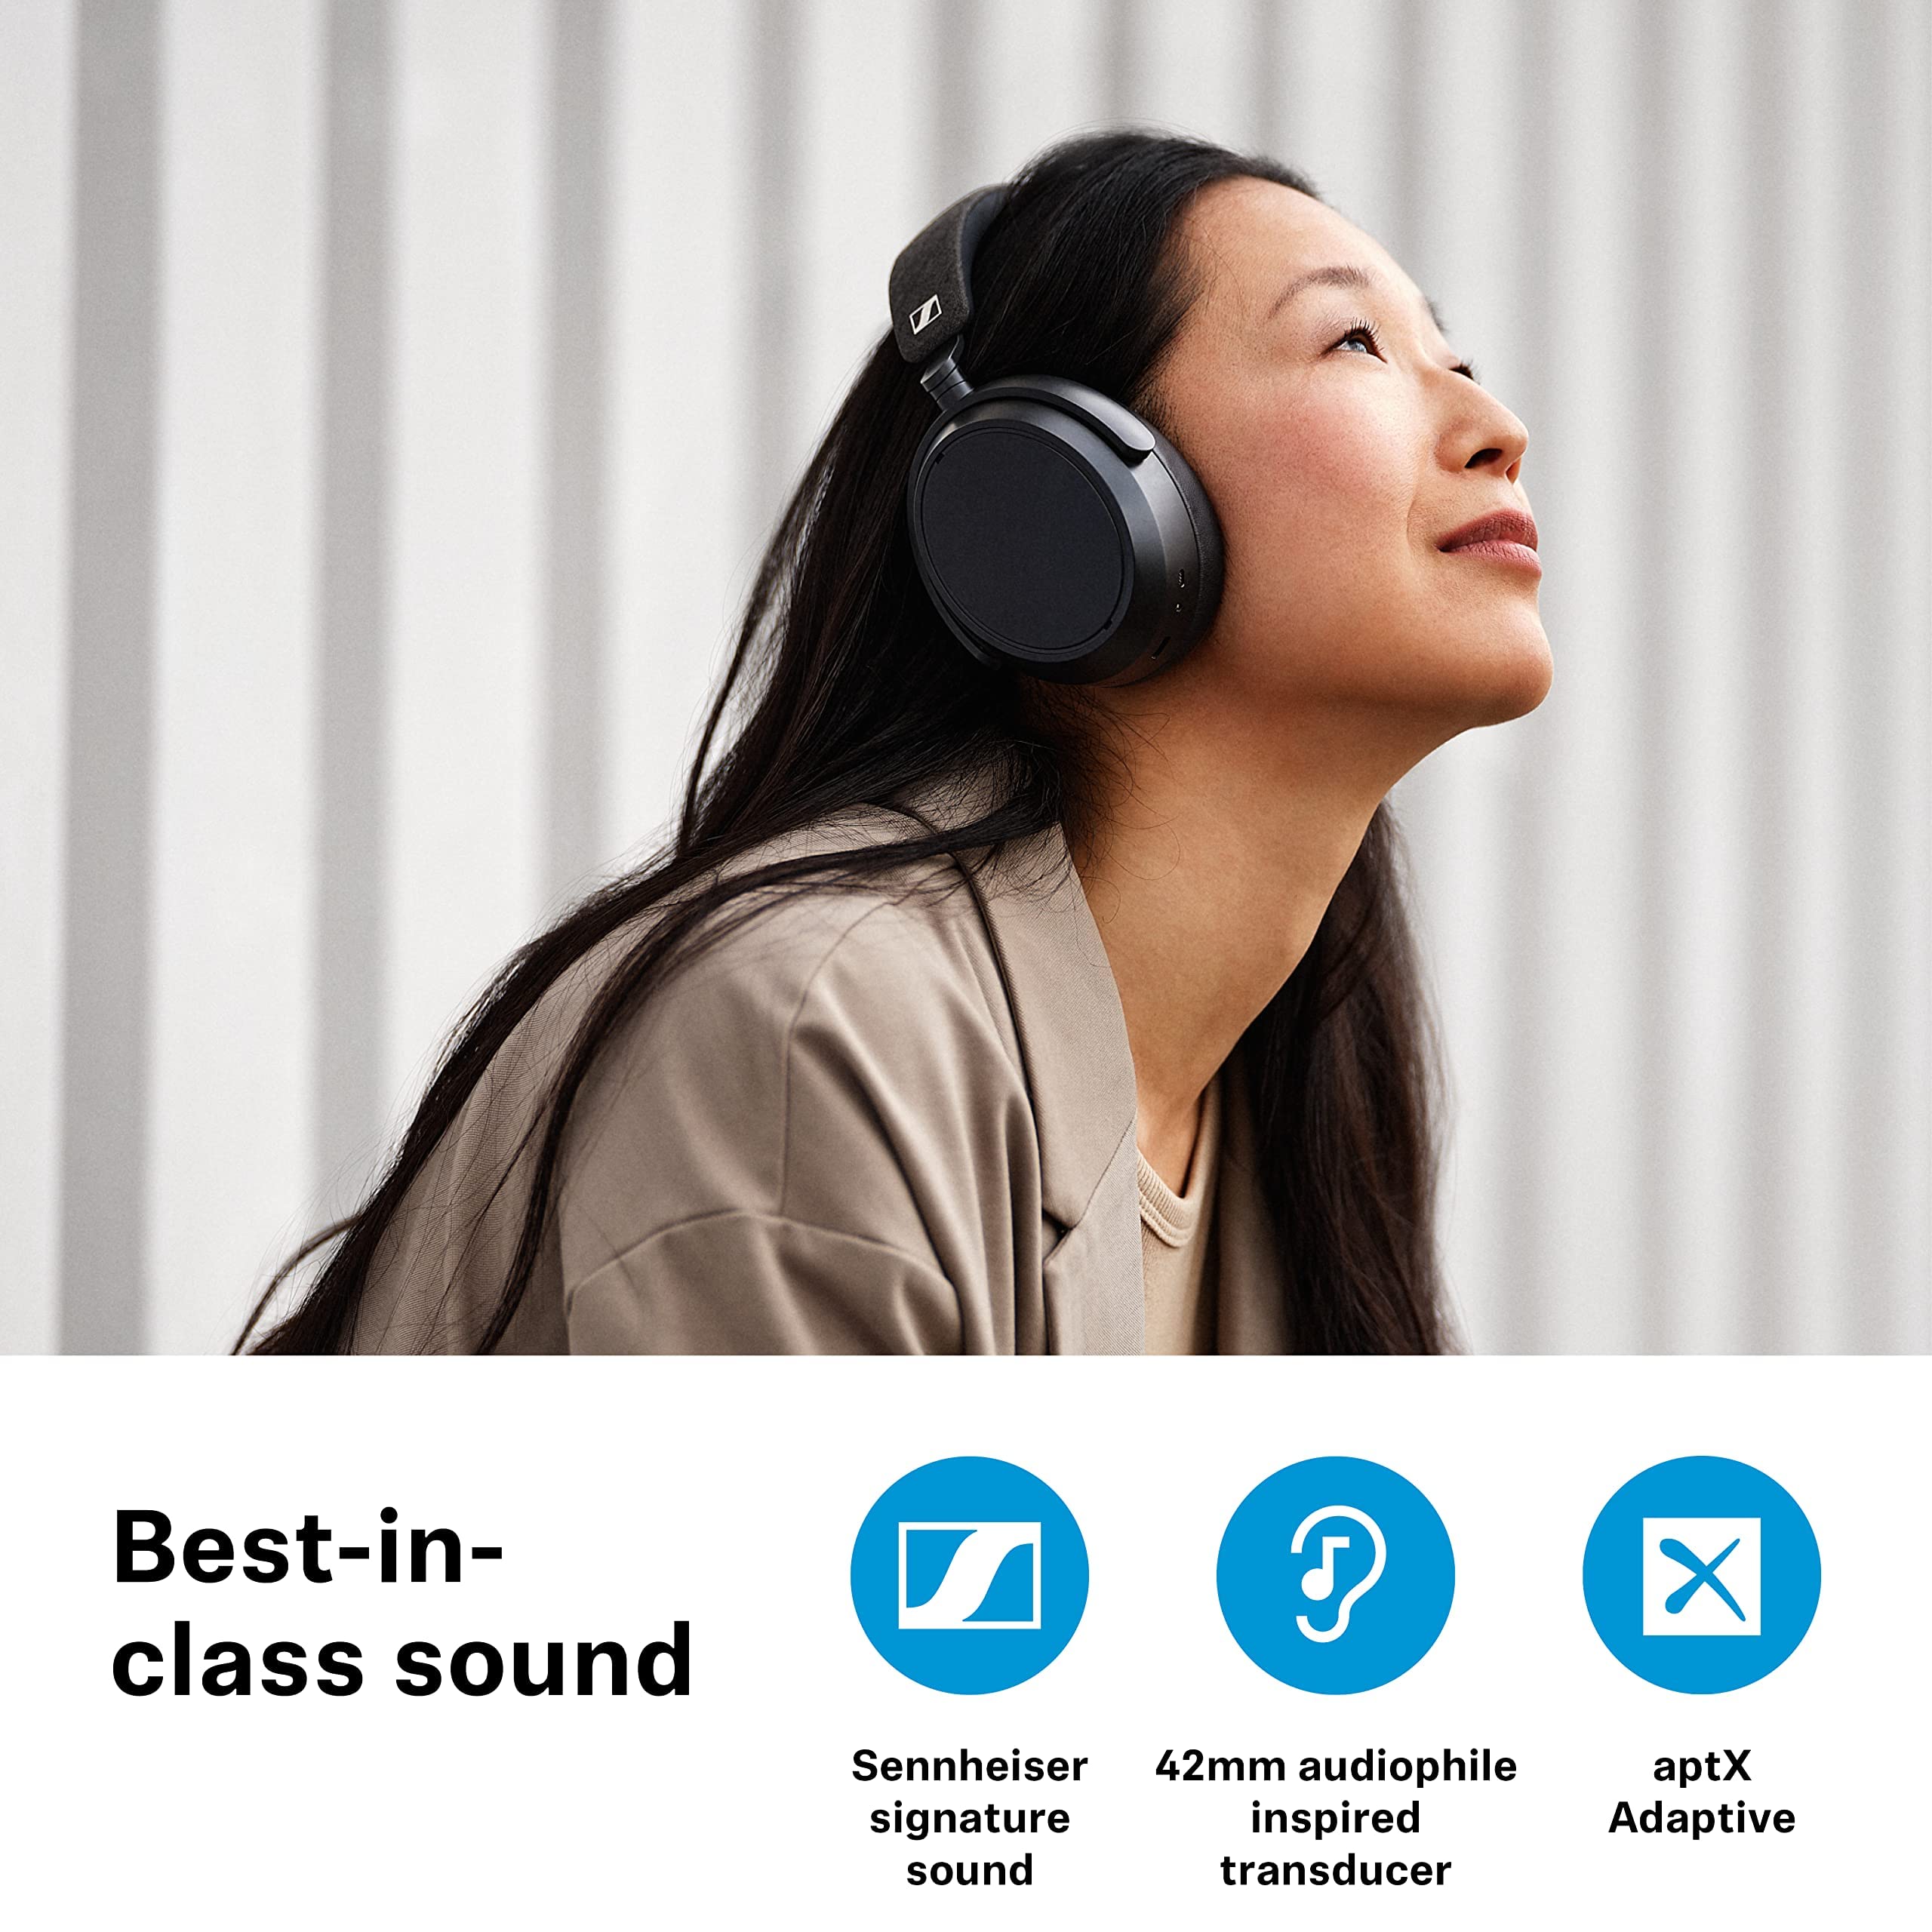 Sennheiser Momentum 4 Wireless Headphones - Bluetooth Headset for Crystal-Clear Calls with Adaptive Noise Cancellation, 60h Battery Life, Customizable Sound - White )